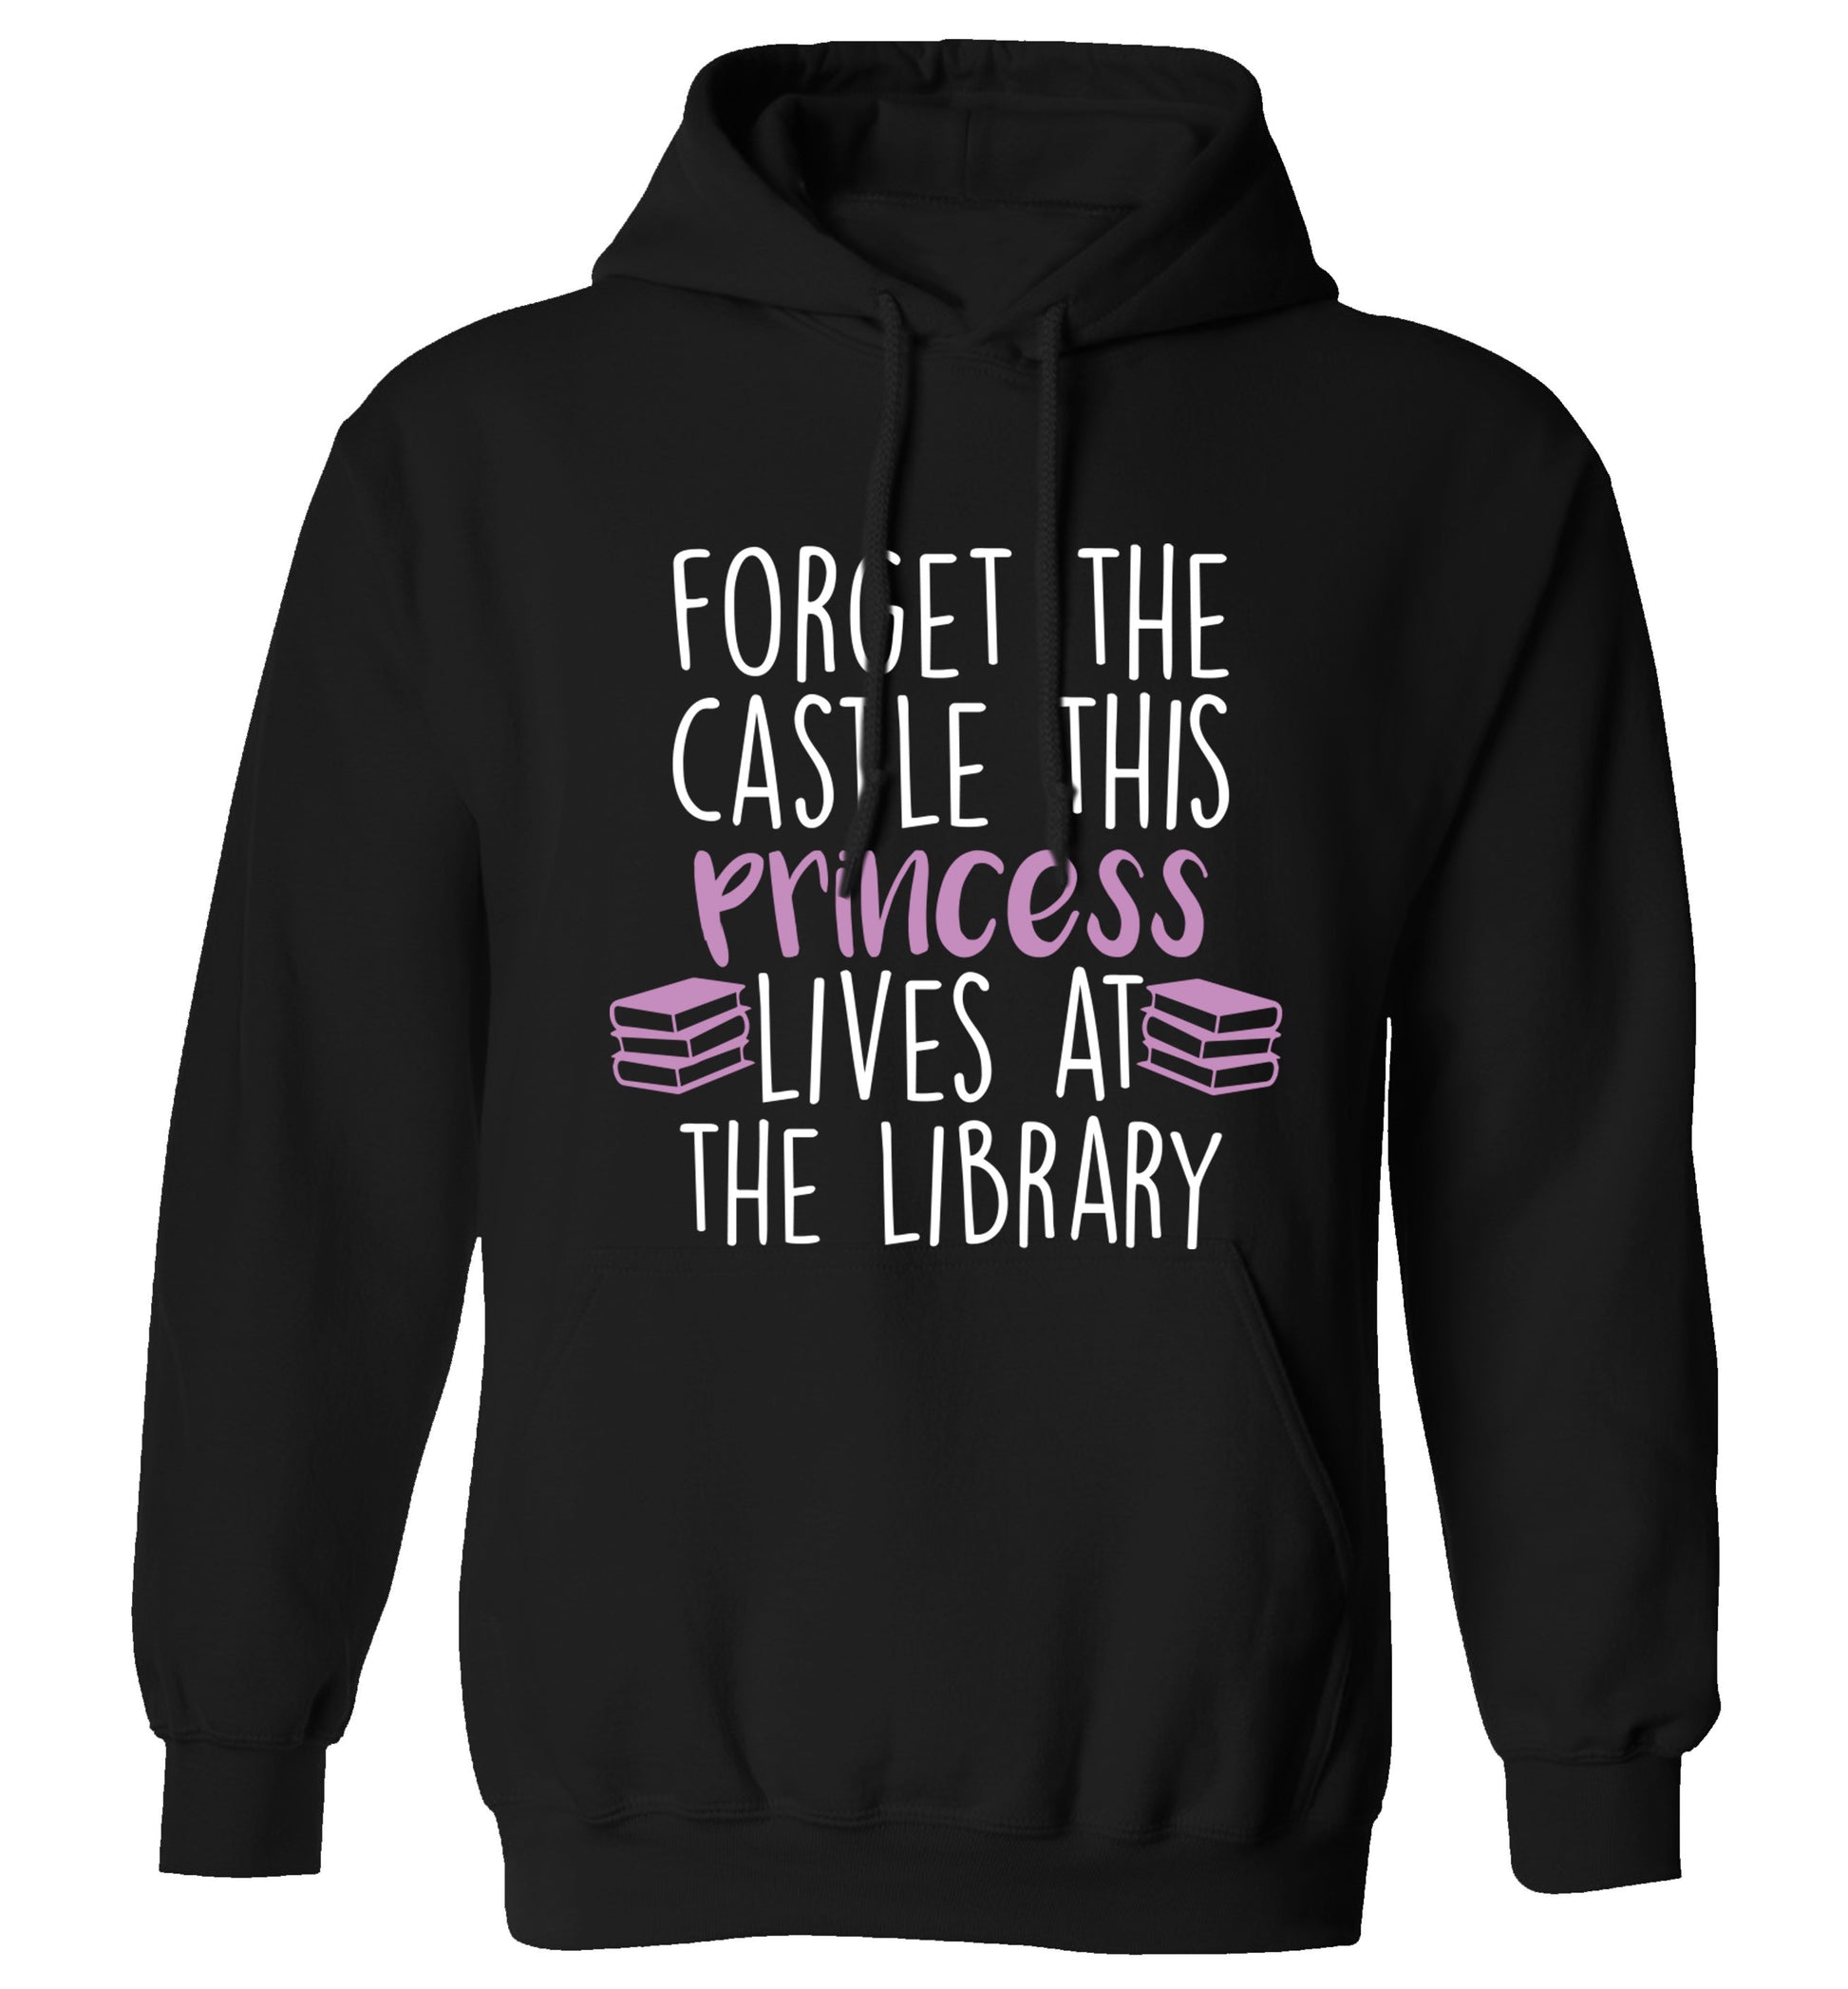 Forget the castle this princess lives at the library adults unisex black hoodie 2XL